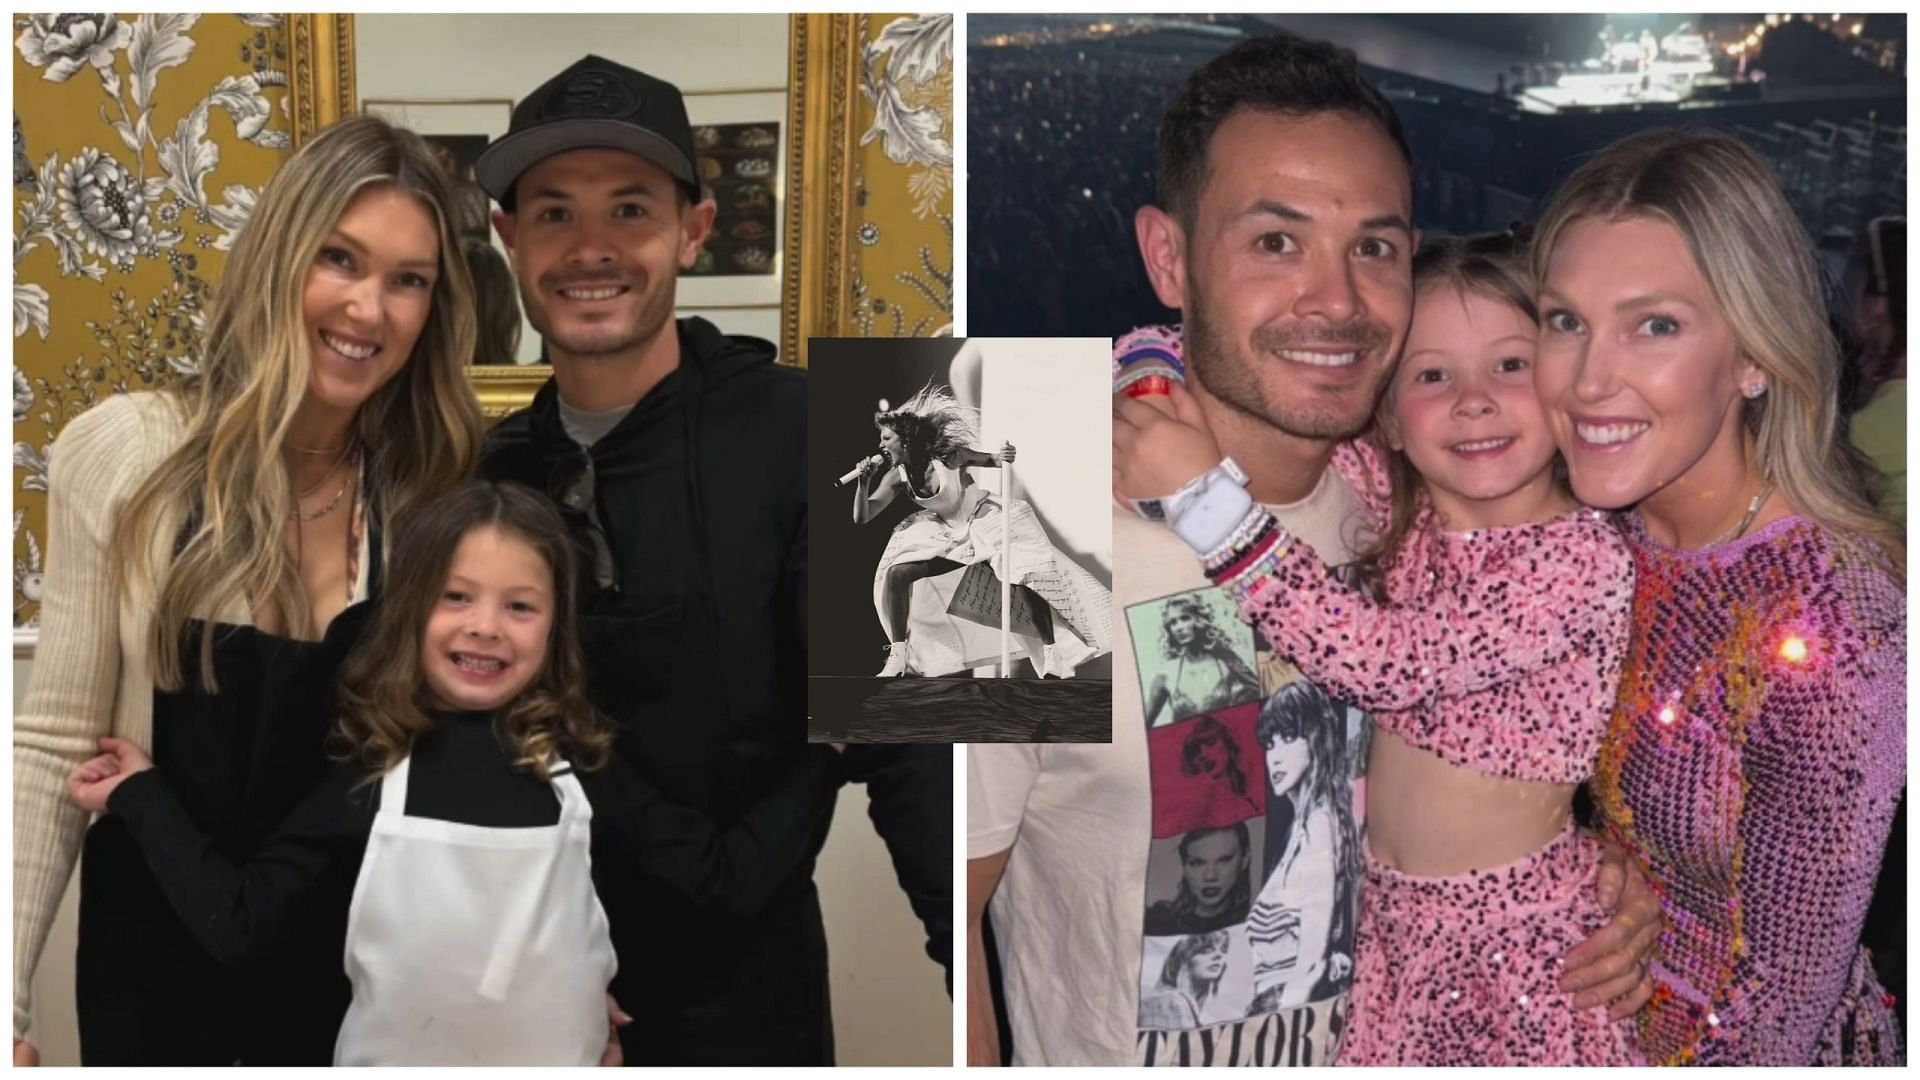 Kyle Larson and his family attends Taylor Swift